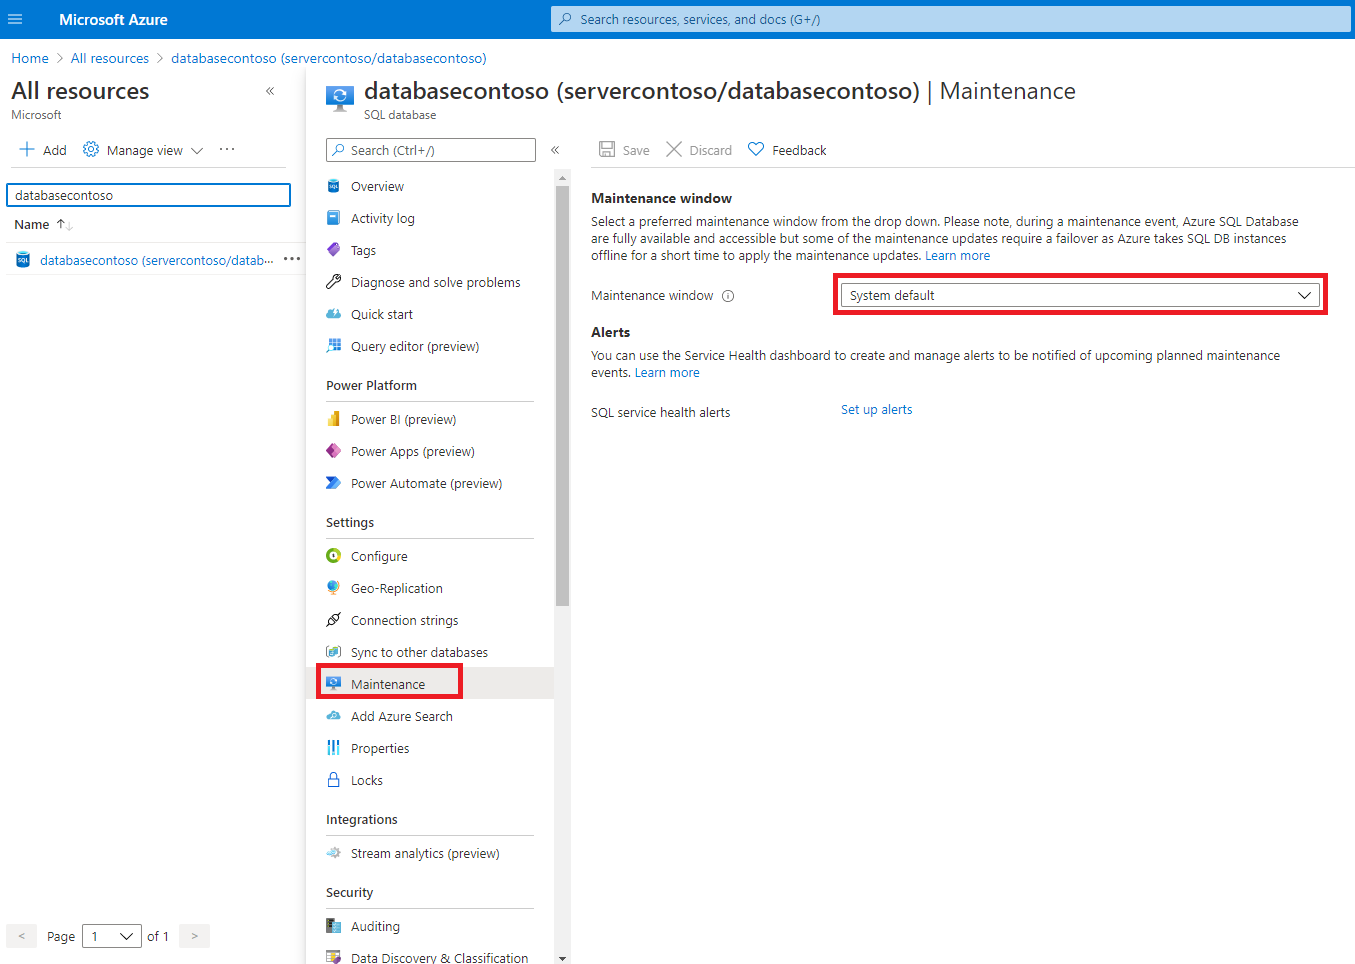 Screenshot from the Azure portal of the SQL database Maintenance page.